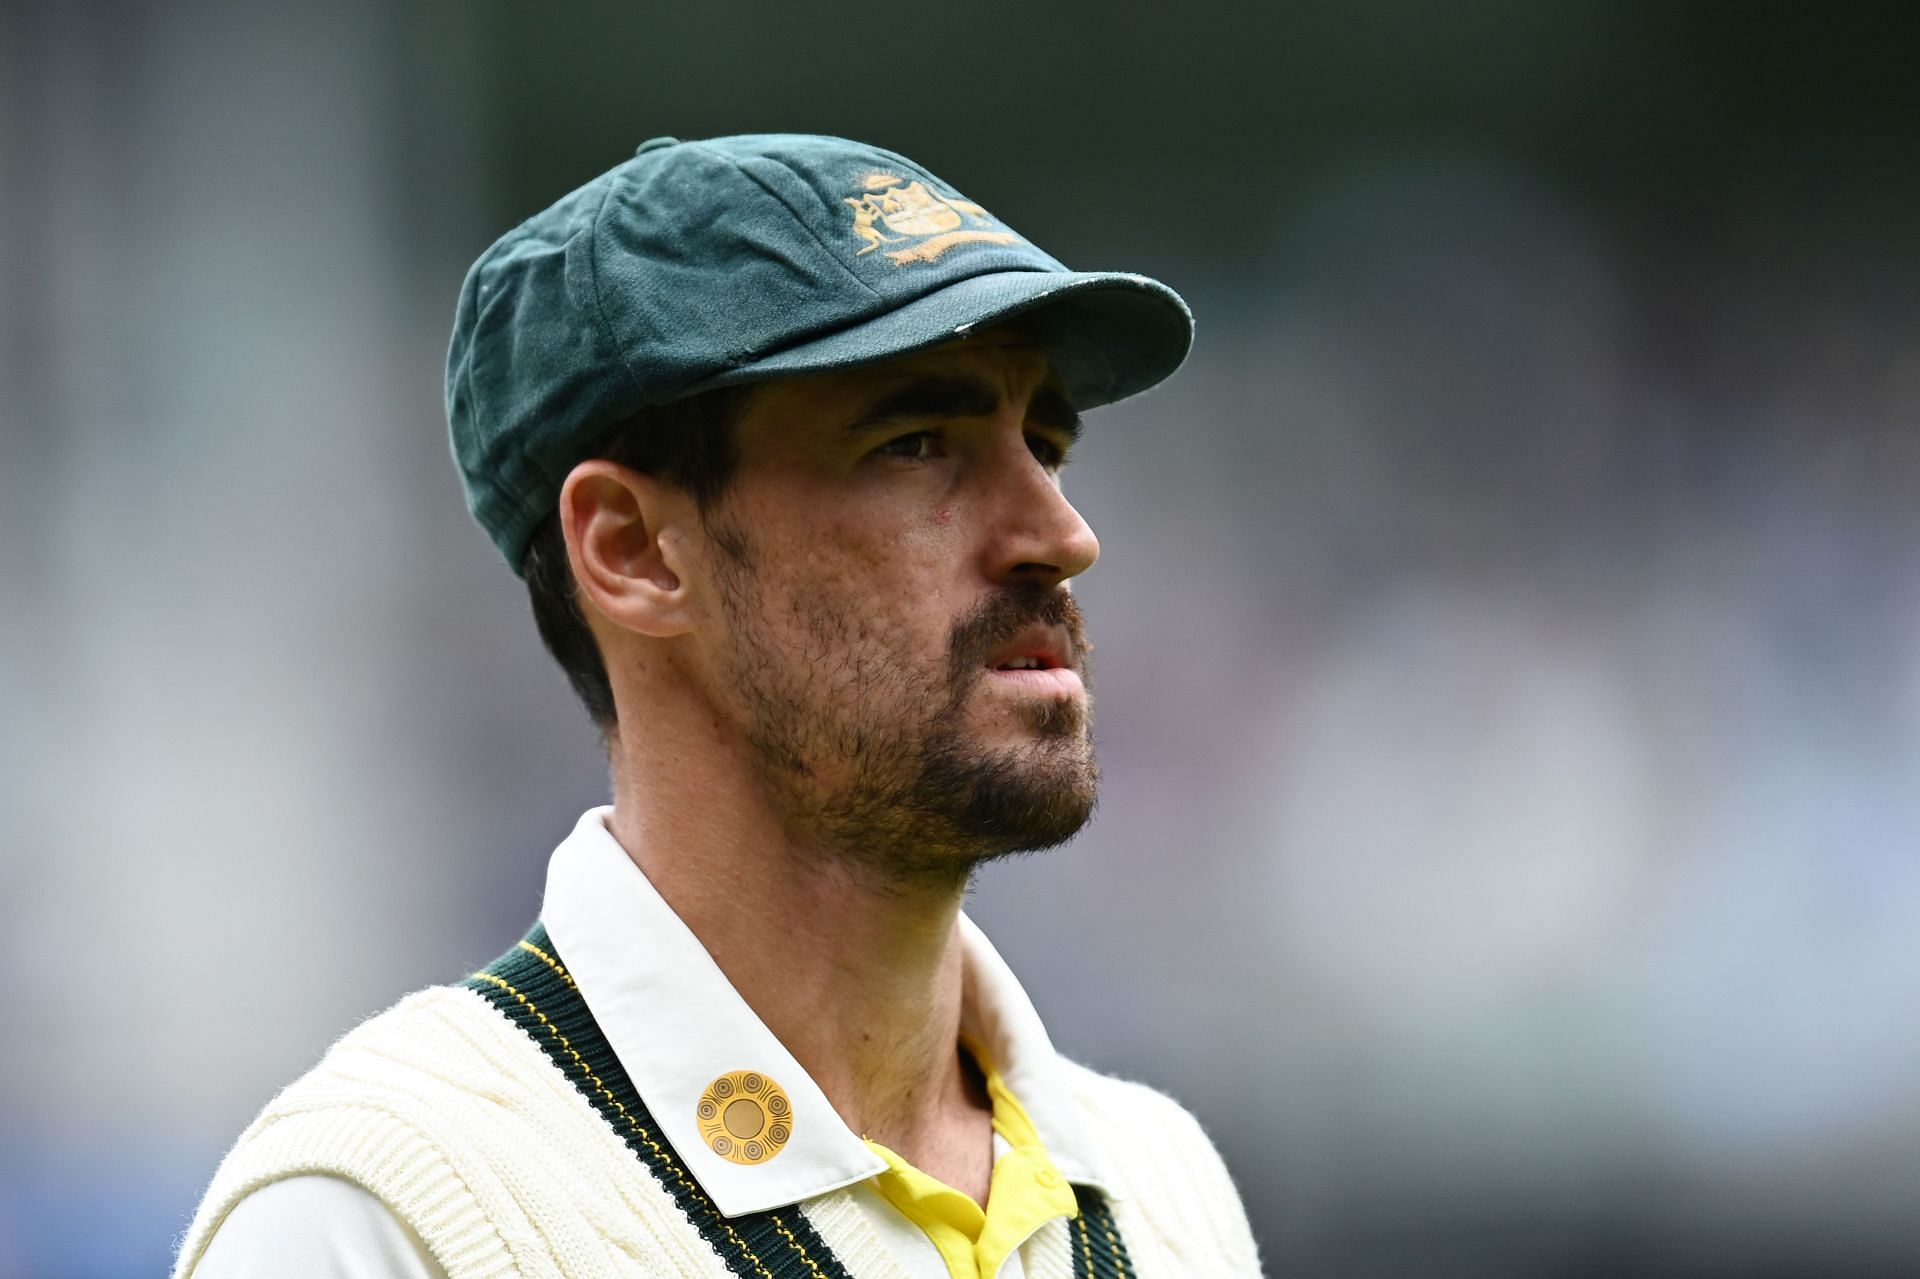 Mitchell Starc has never played for the Kolkata Knight Riders